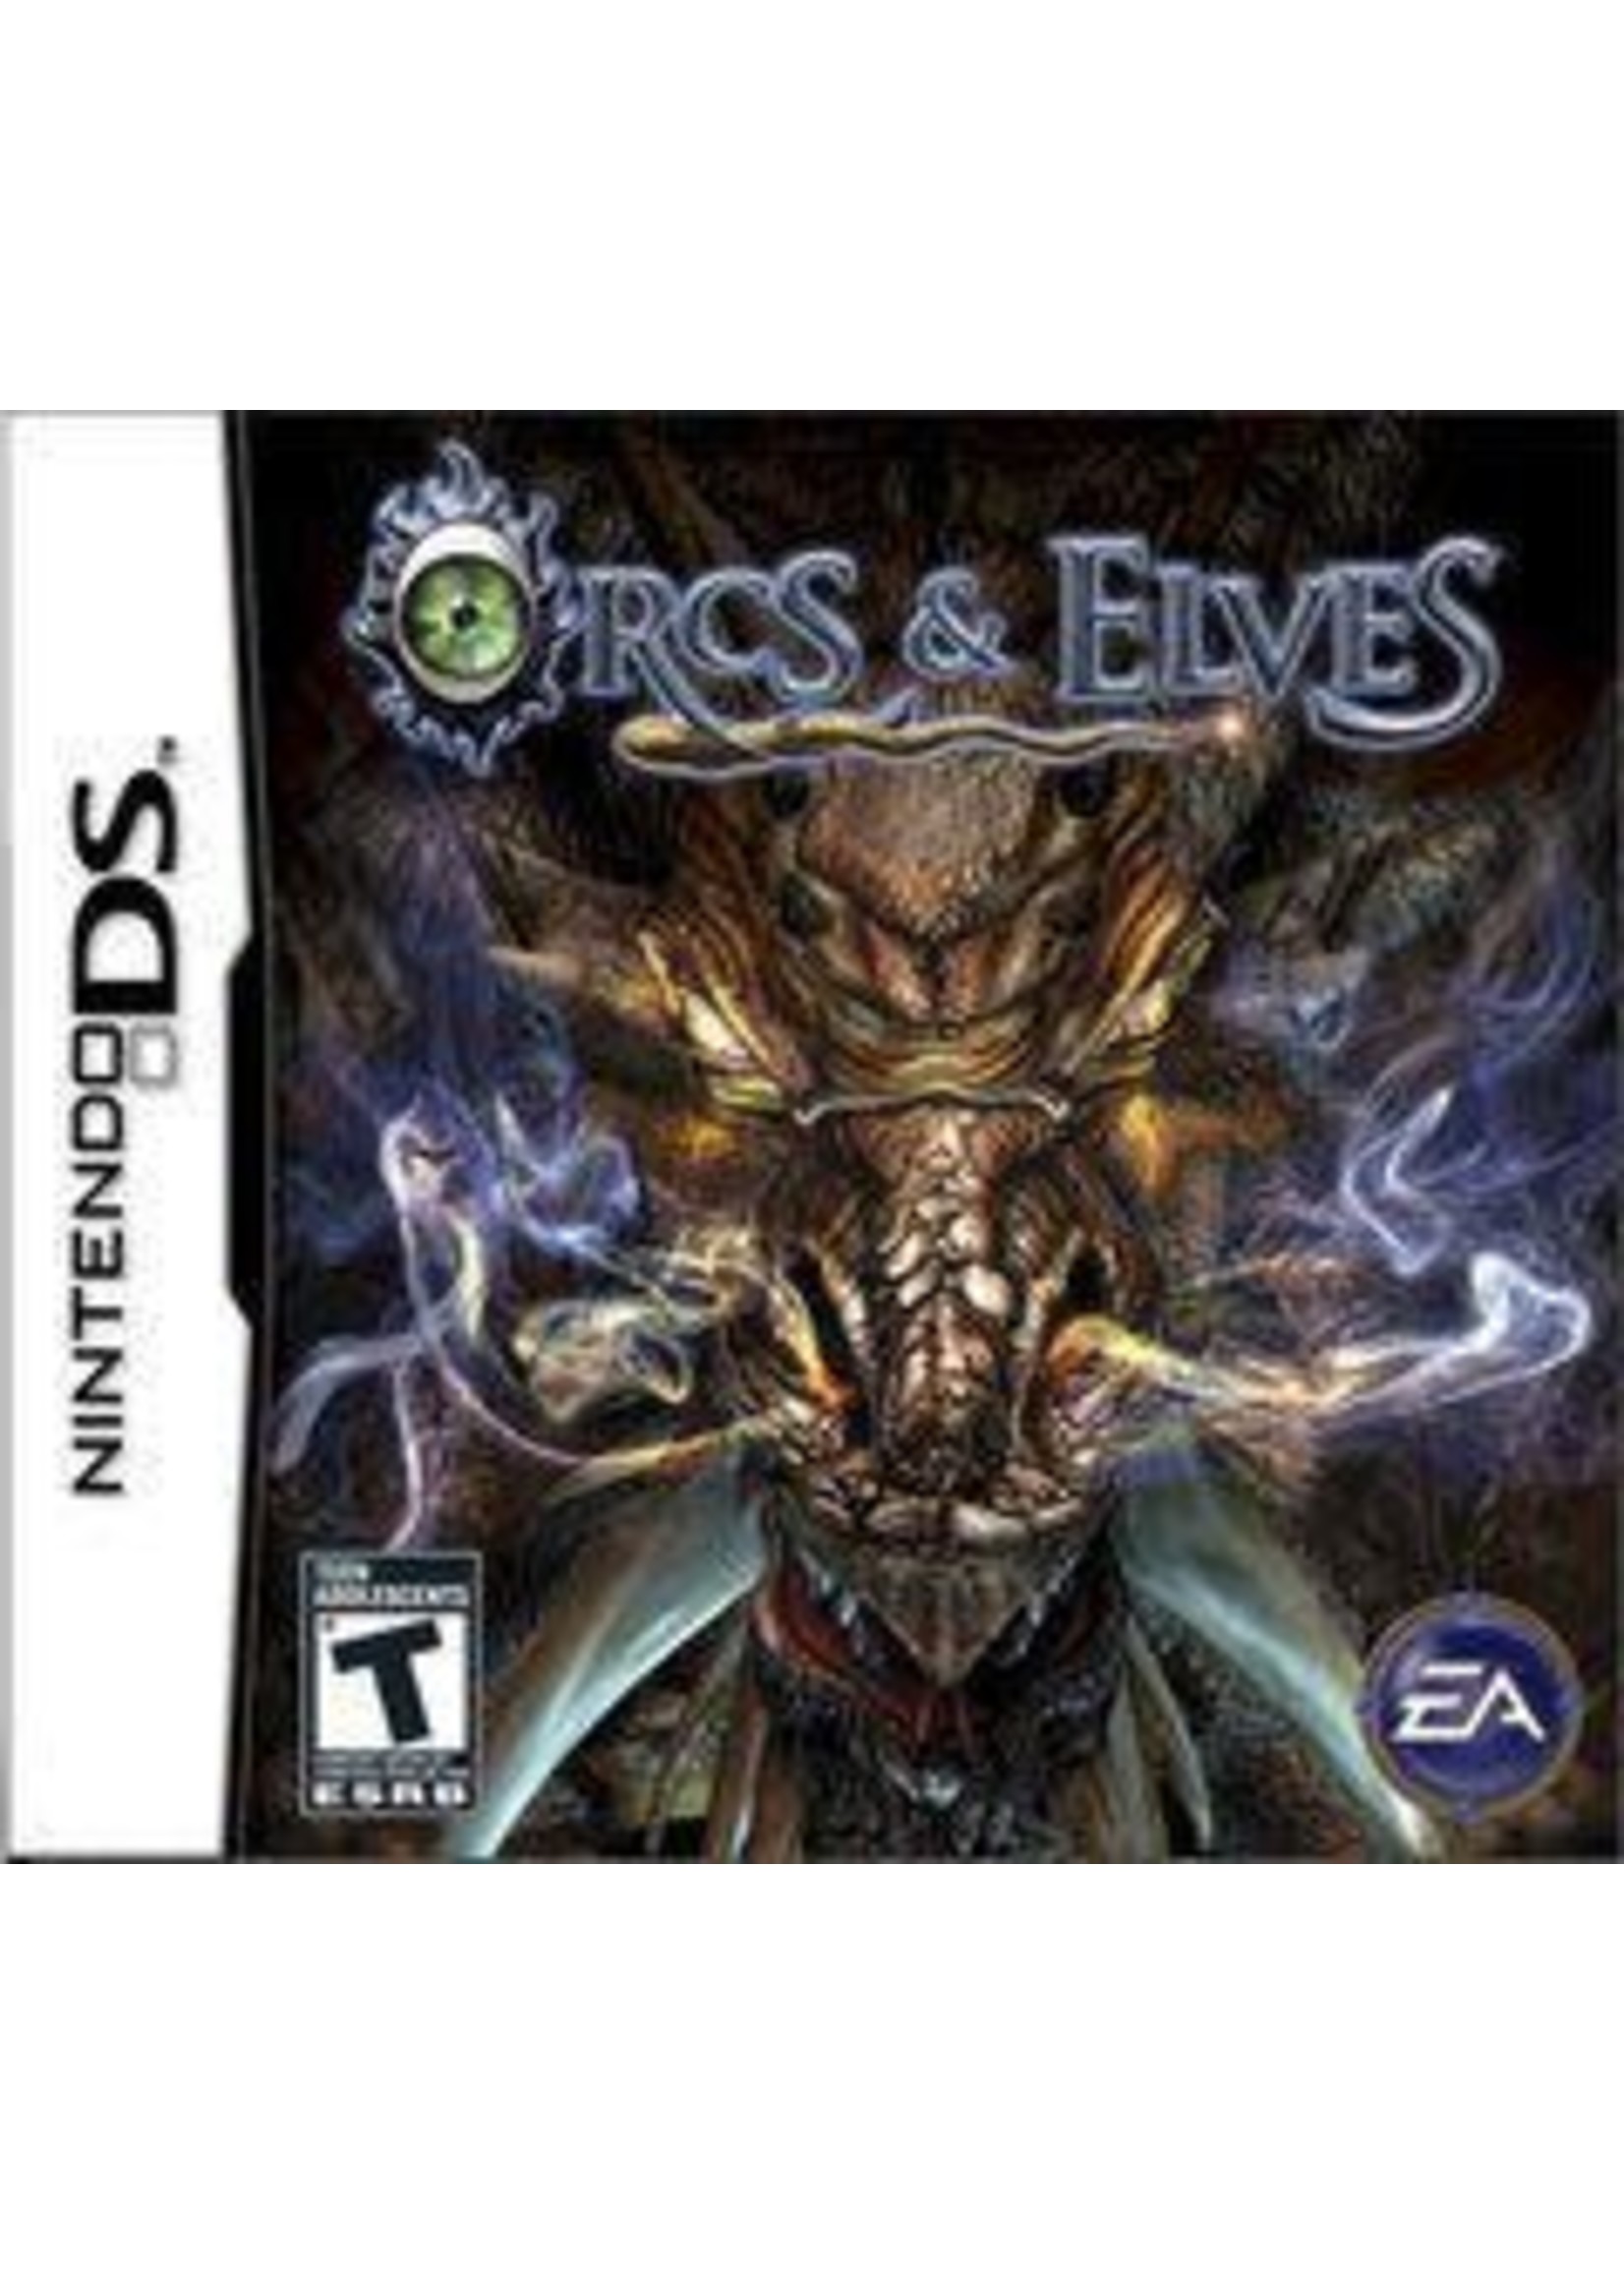 Orcs And Elves Nintendo DS